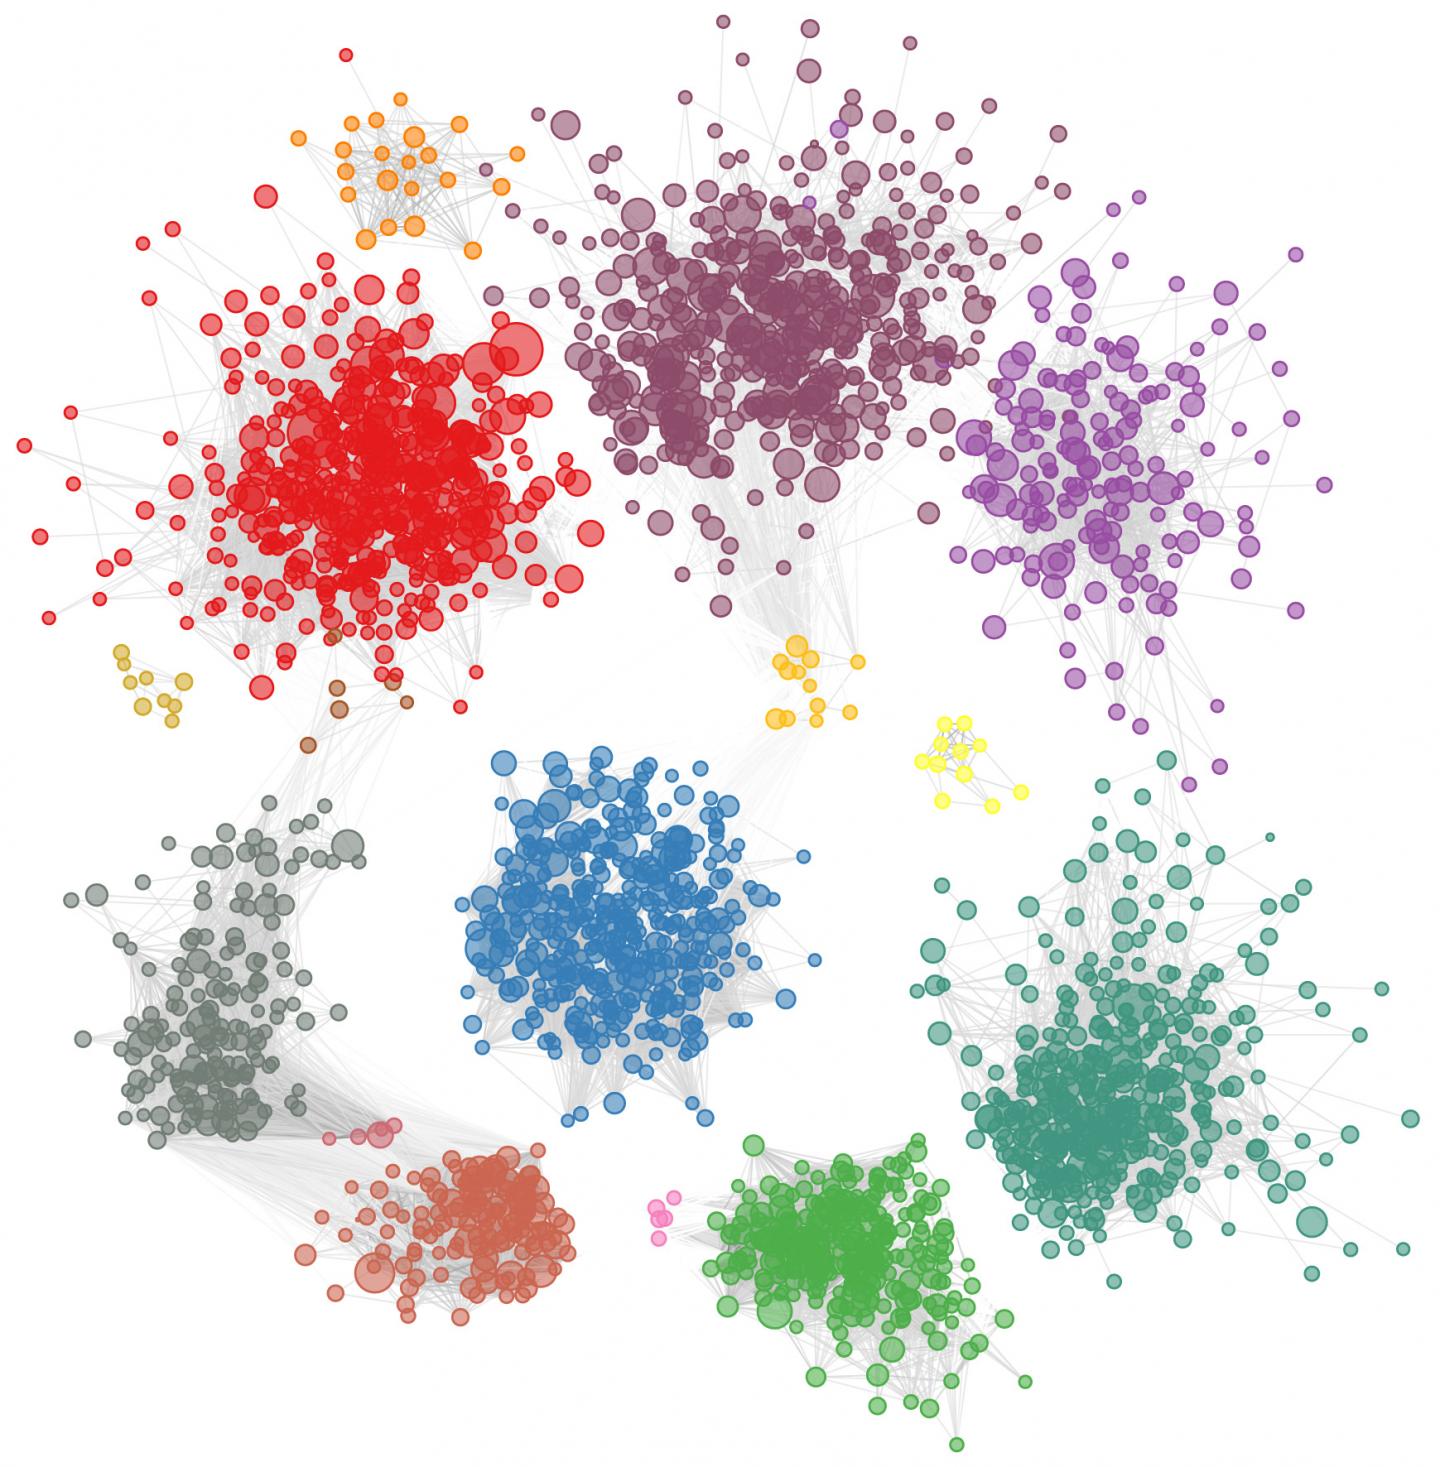 Clusters of Autism-Related Genes